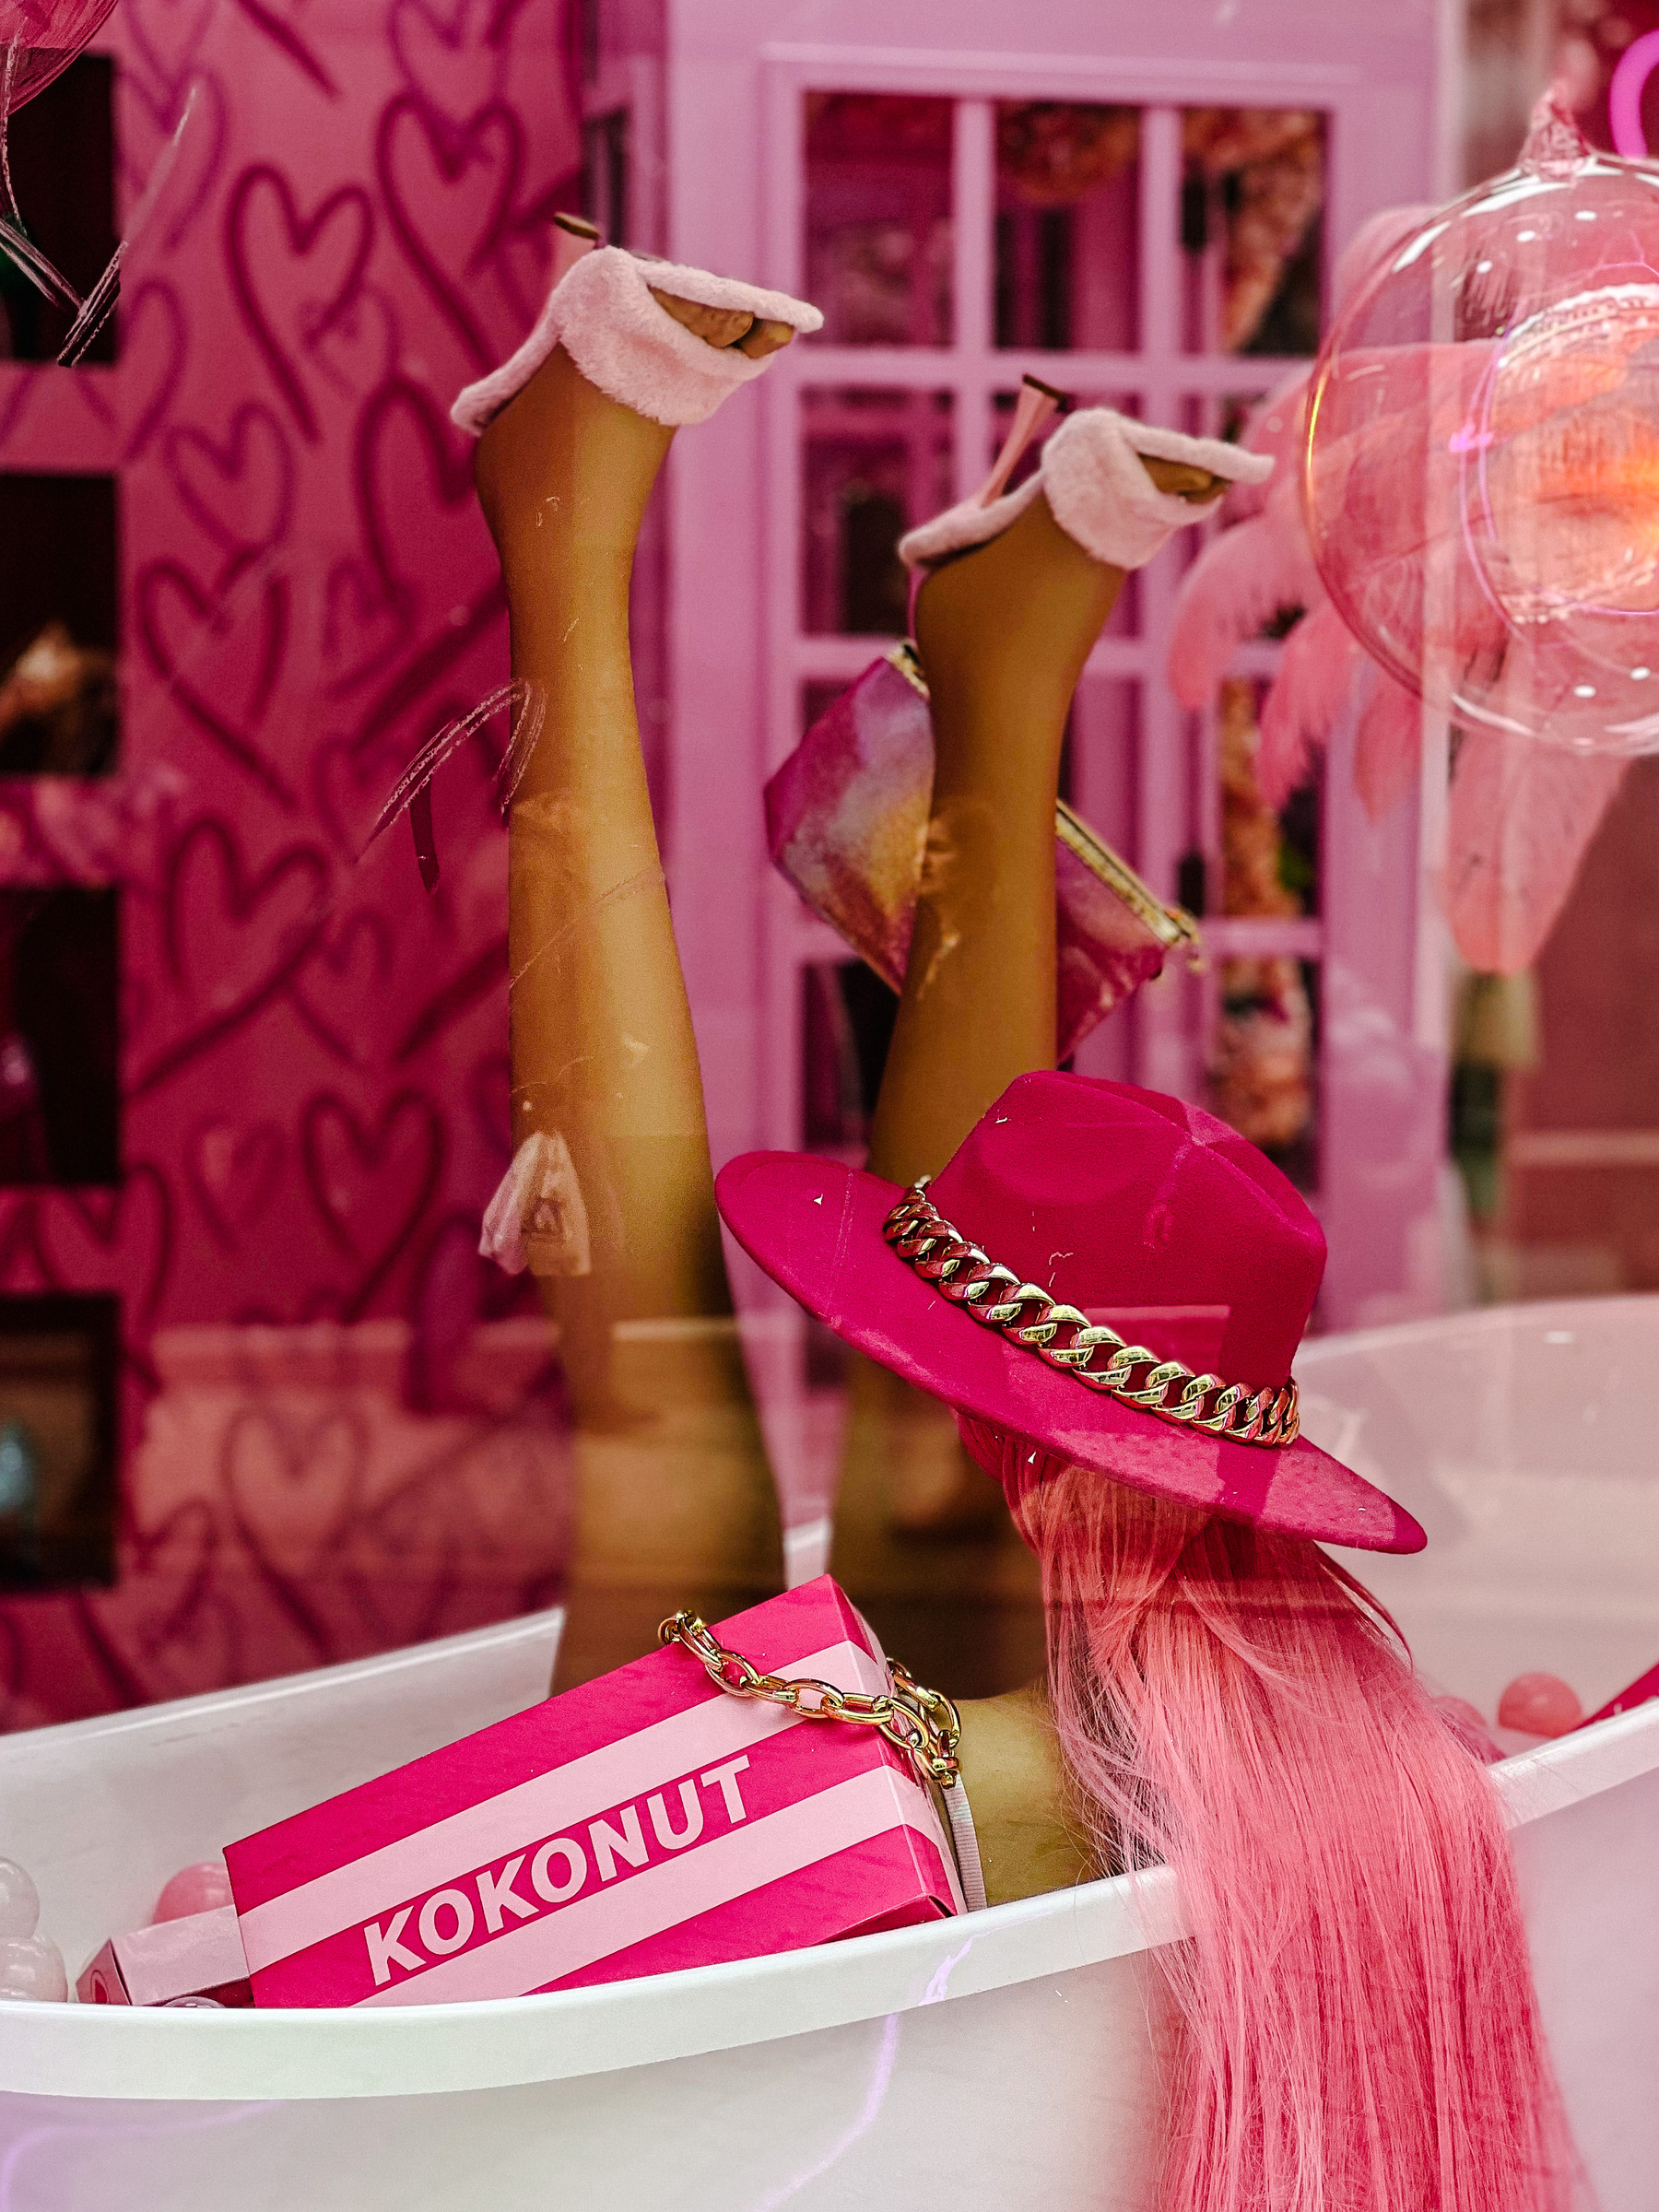 A mannequin, with a pink hat, in a bathtub, in a pink room. Pink everywhere!